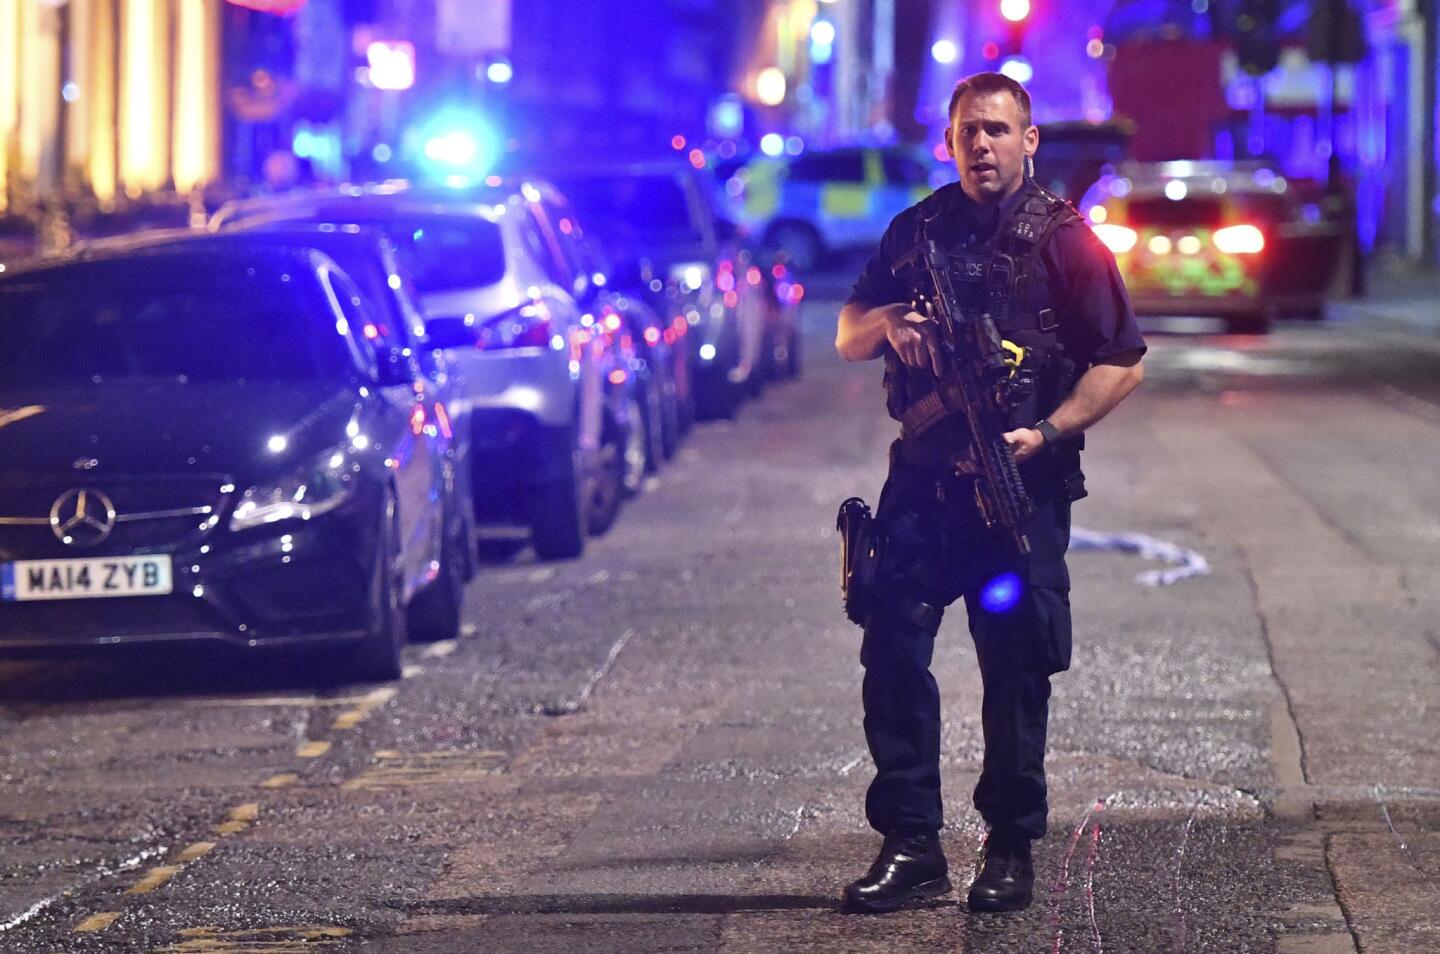 An armed police officer stands on Borough High Streetin London after the attack.